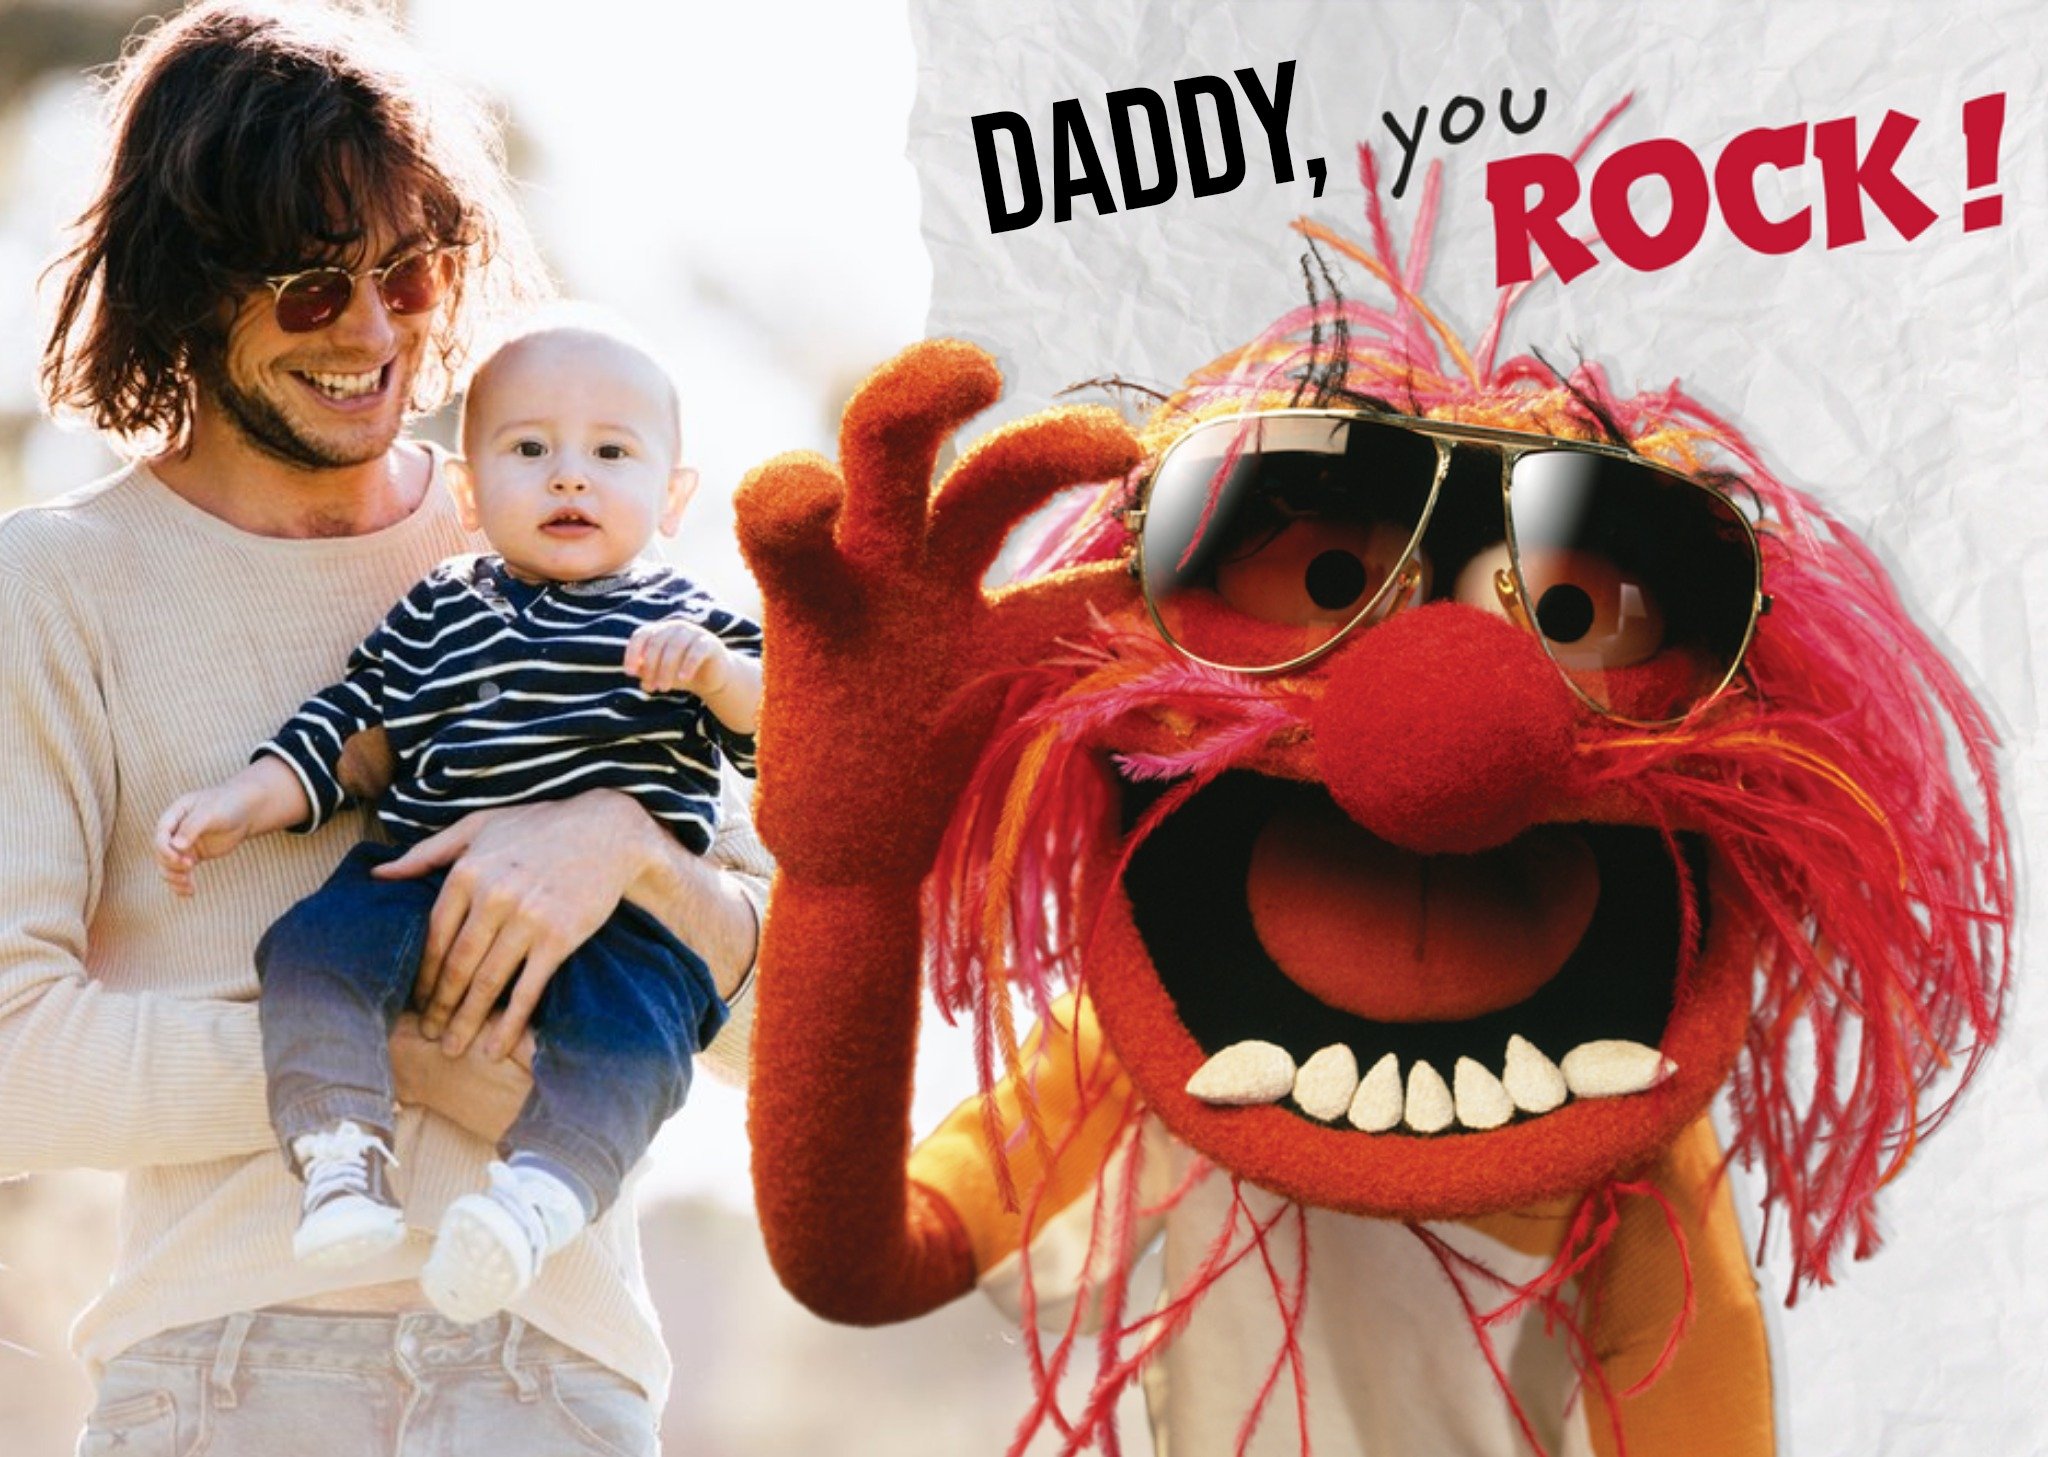 Disney The Muppets Daddy, You Rock Photo Card Ecard